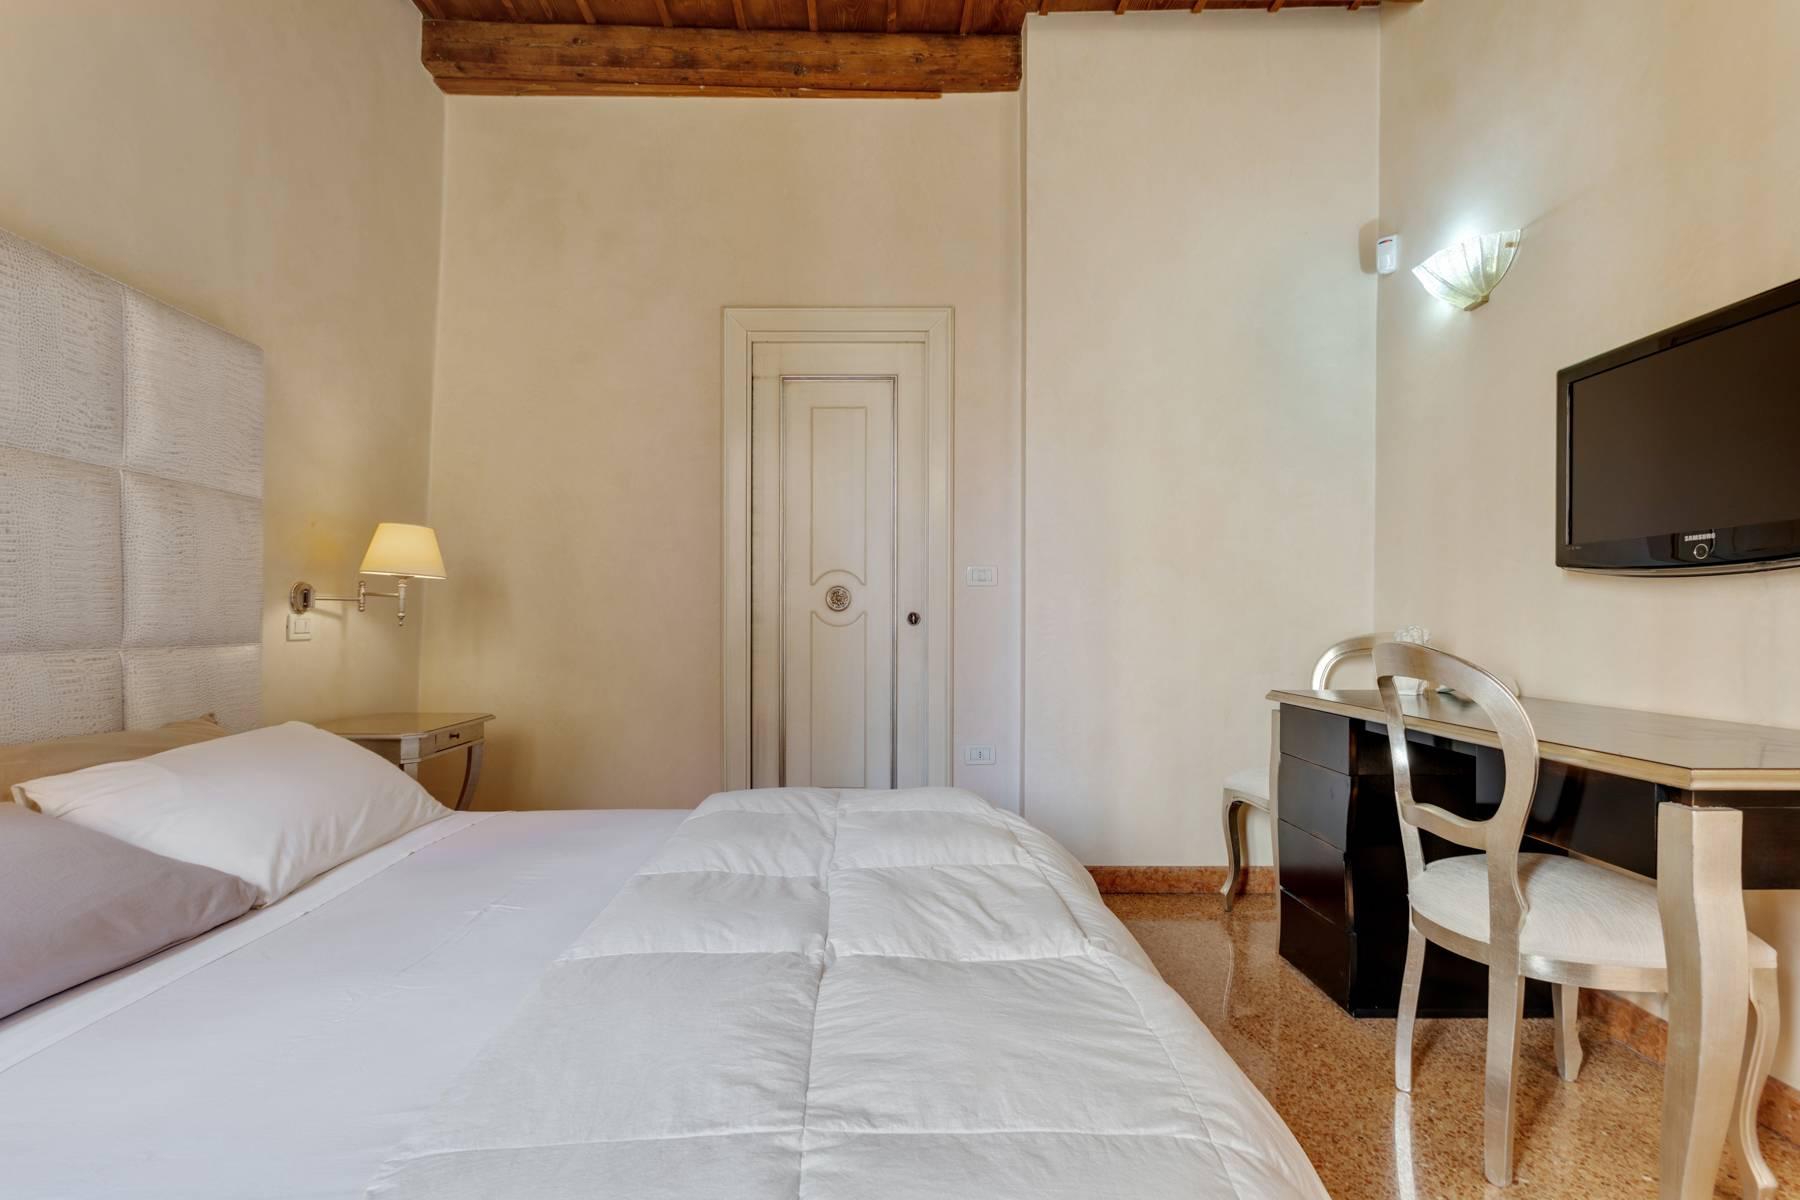 Exquisite apartment just few steps away from Piazza delle Erbe - 21